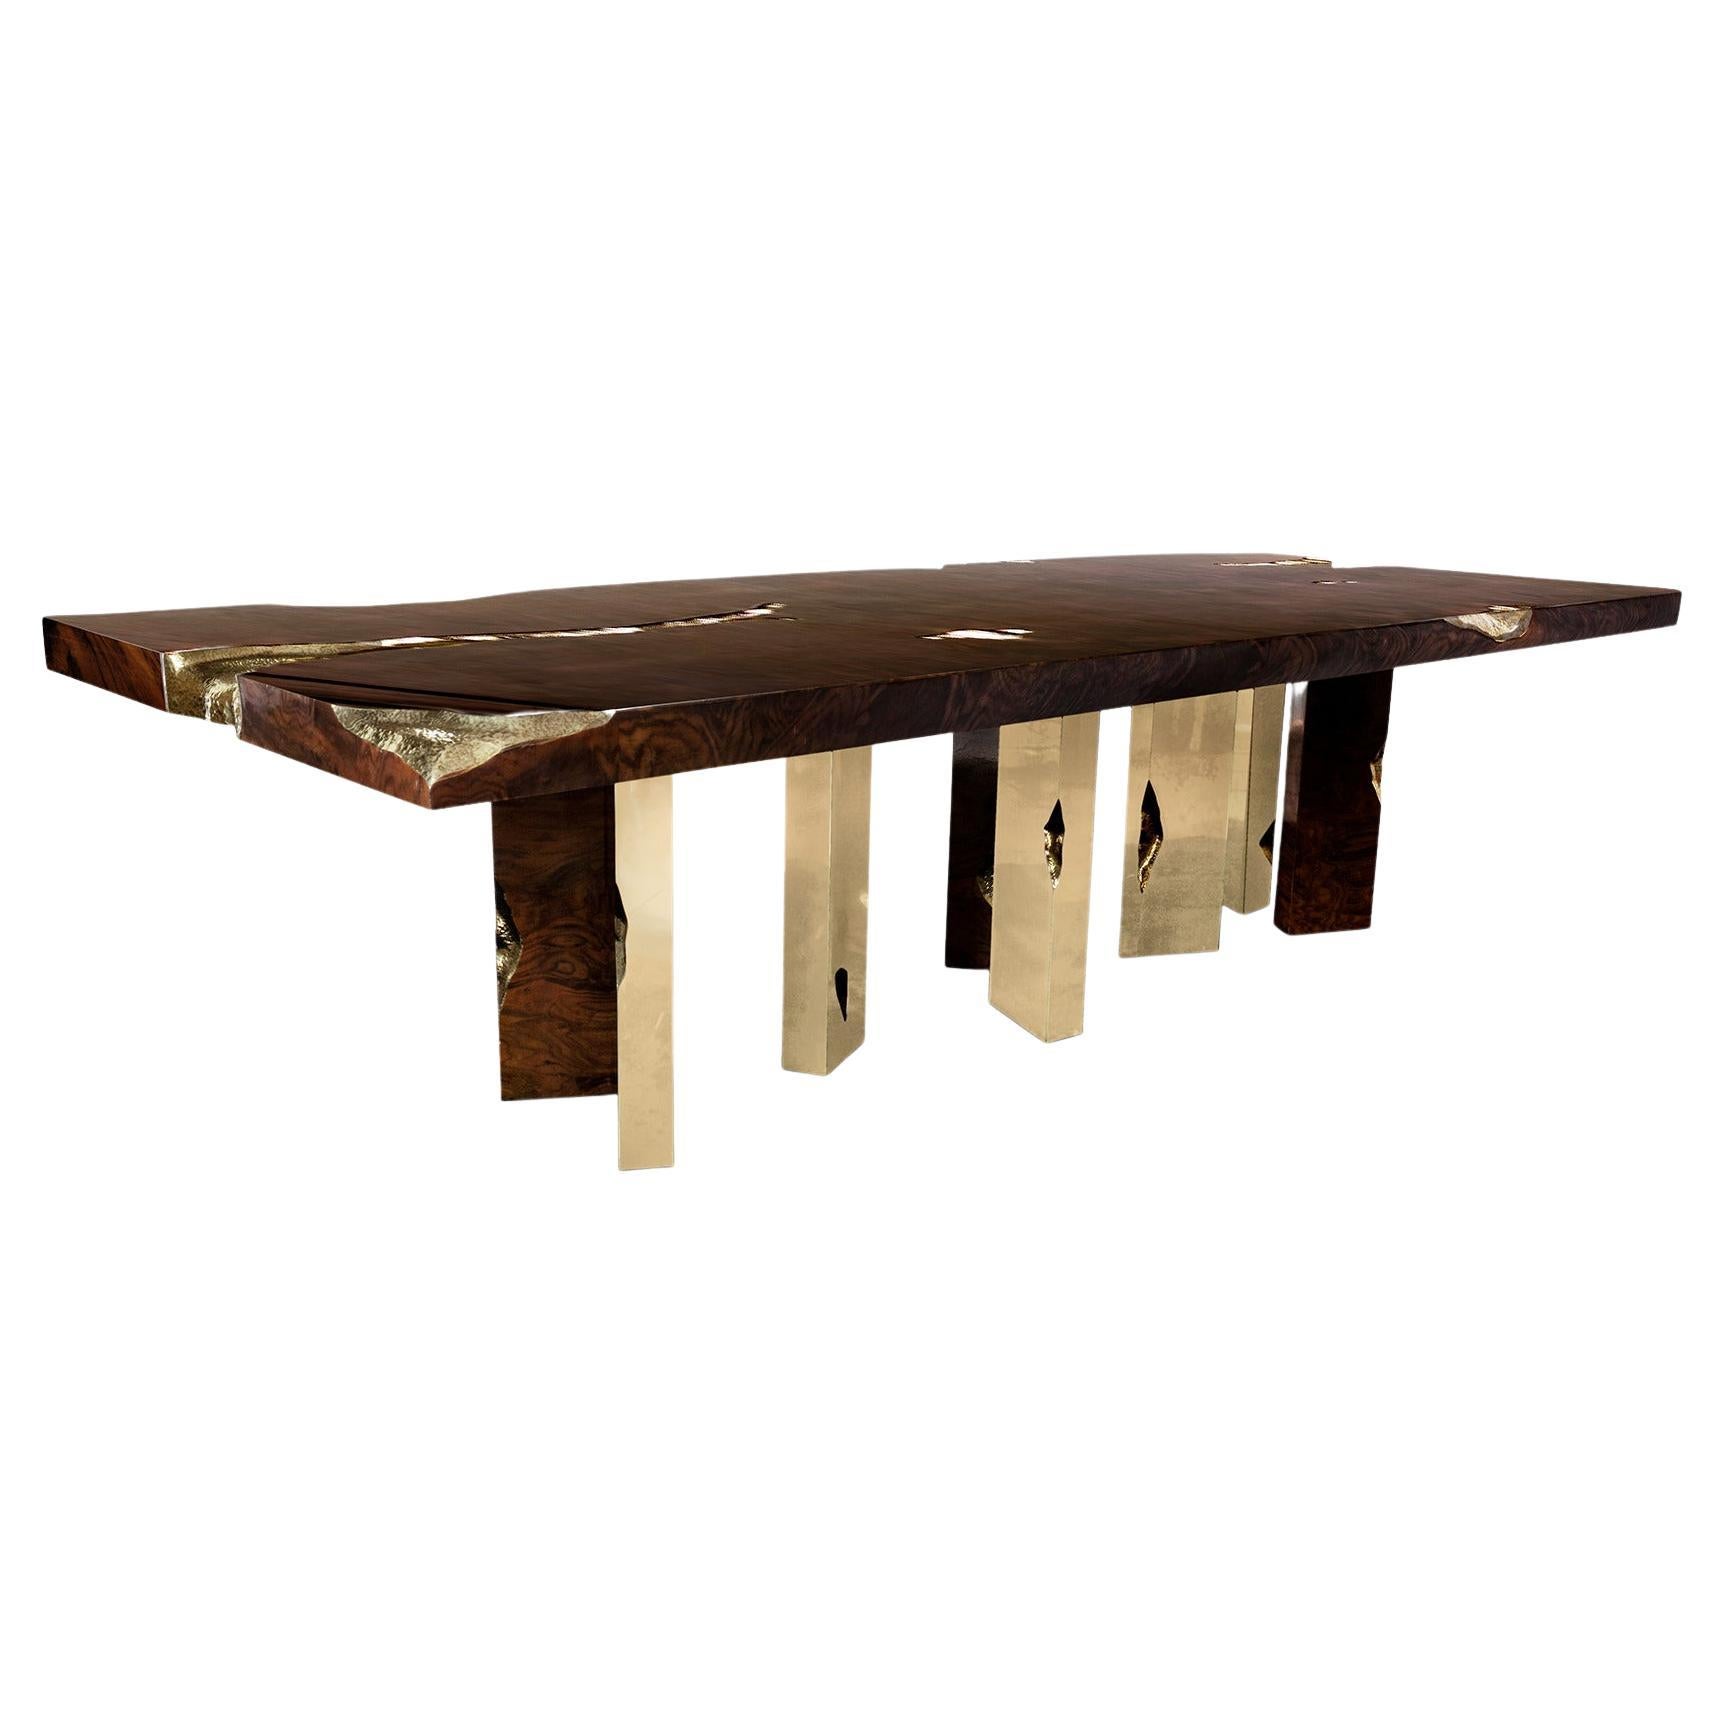 Table in Wood and Metal "Stonehenge" For Sale